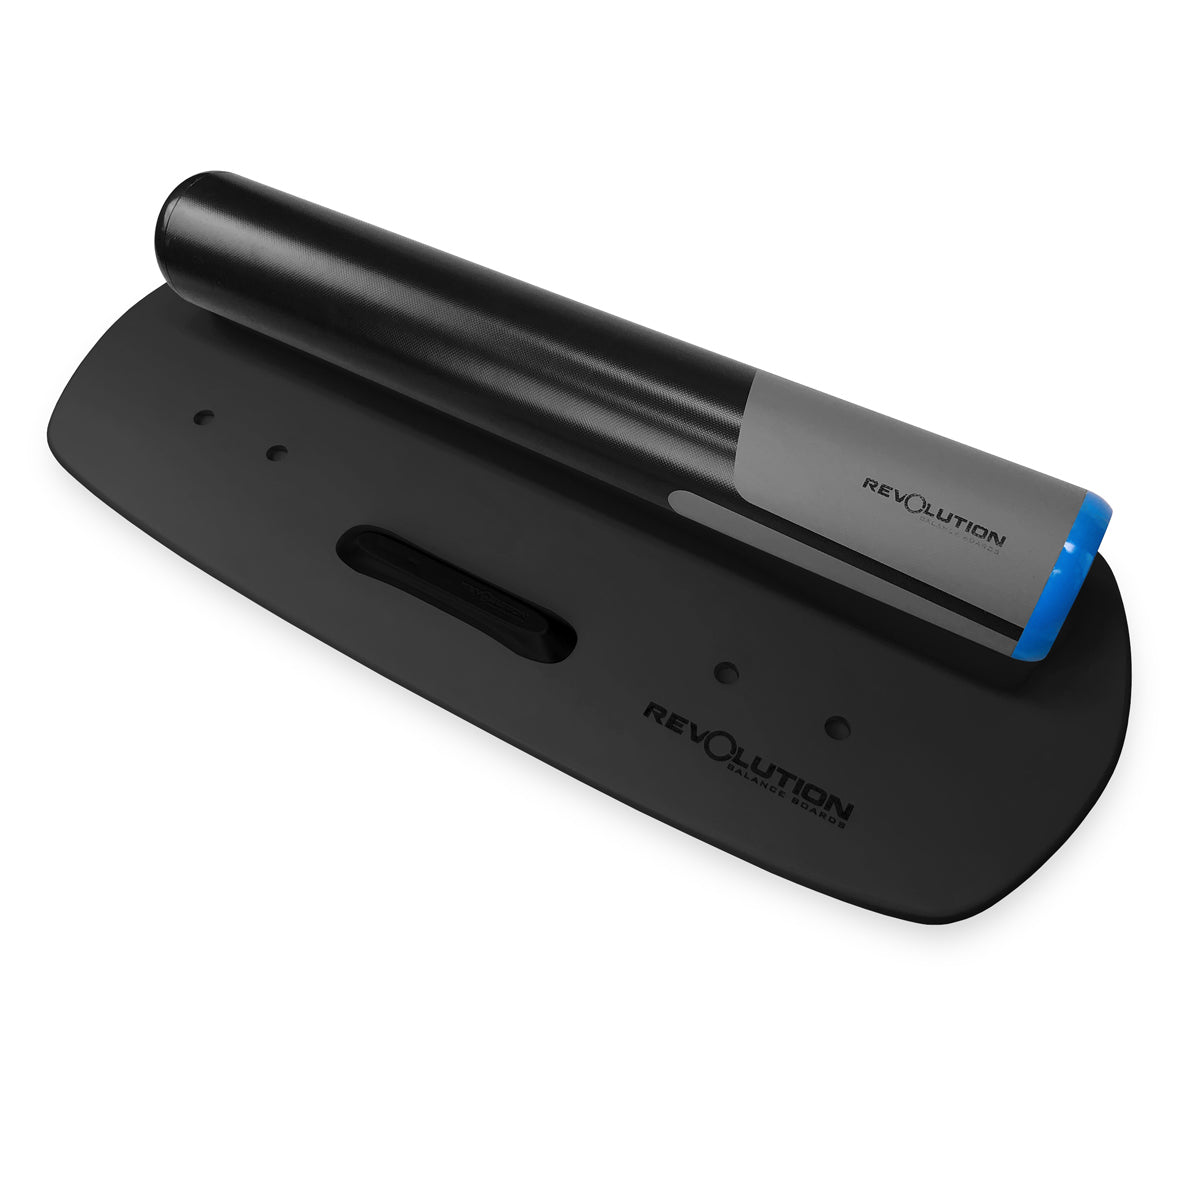 A Revolution black holder with a blue pen on it. The holder has a MagSwitch feature.